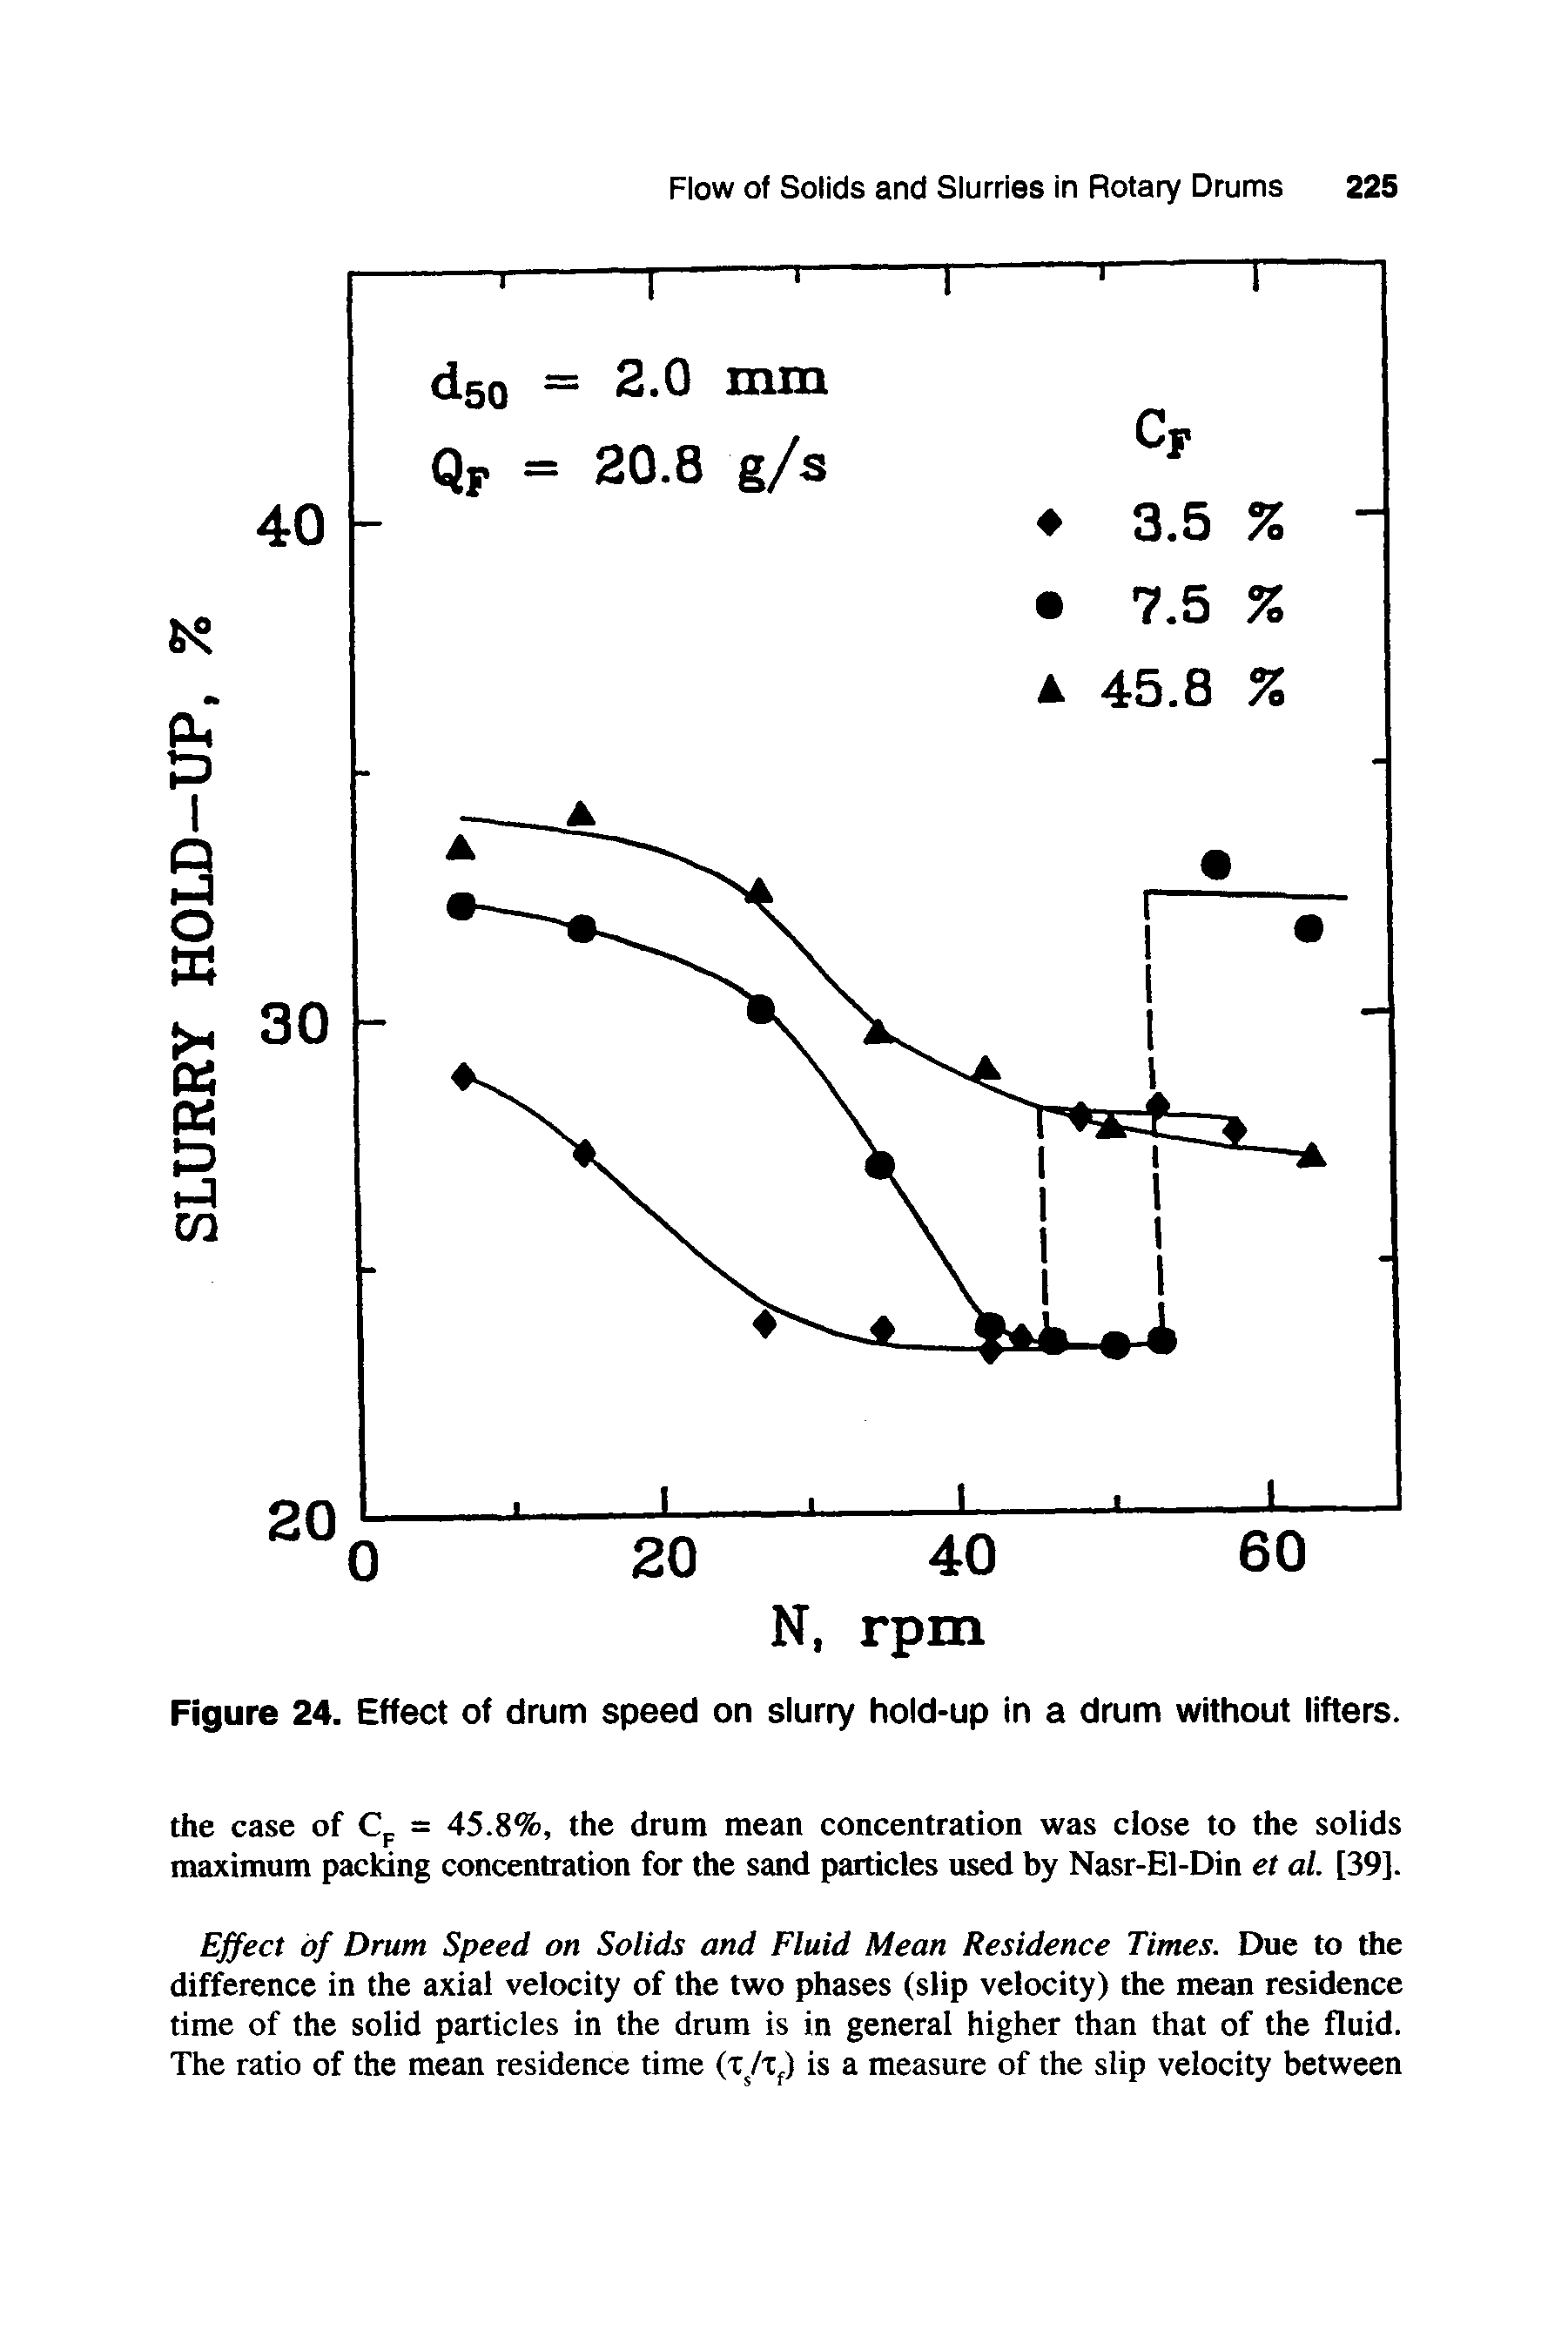 Figure 24. Effect of drum speed on slurry hold-up in a drum without lifters.